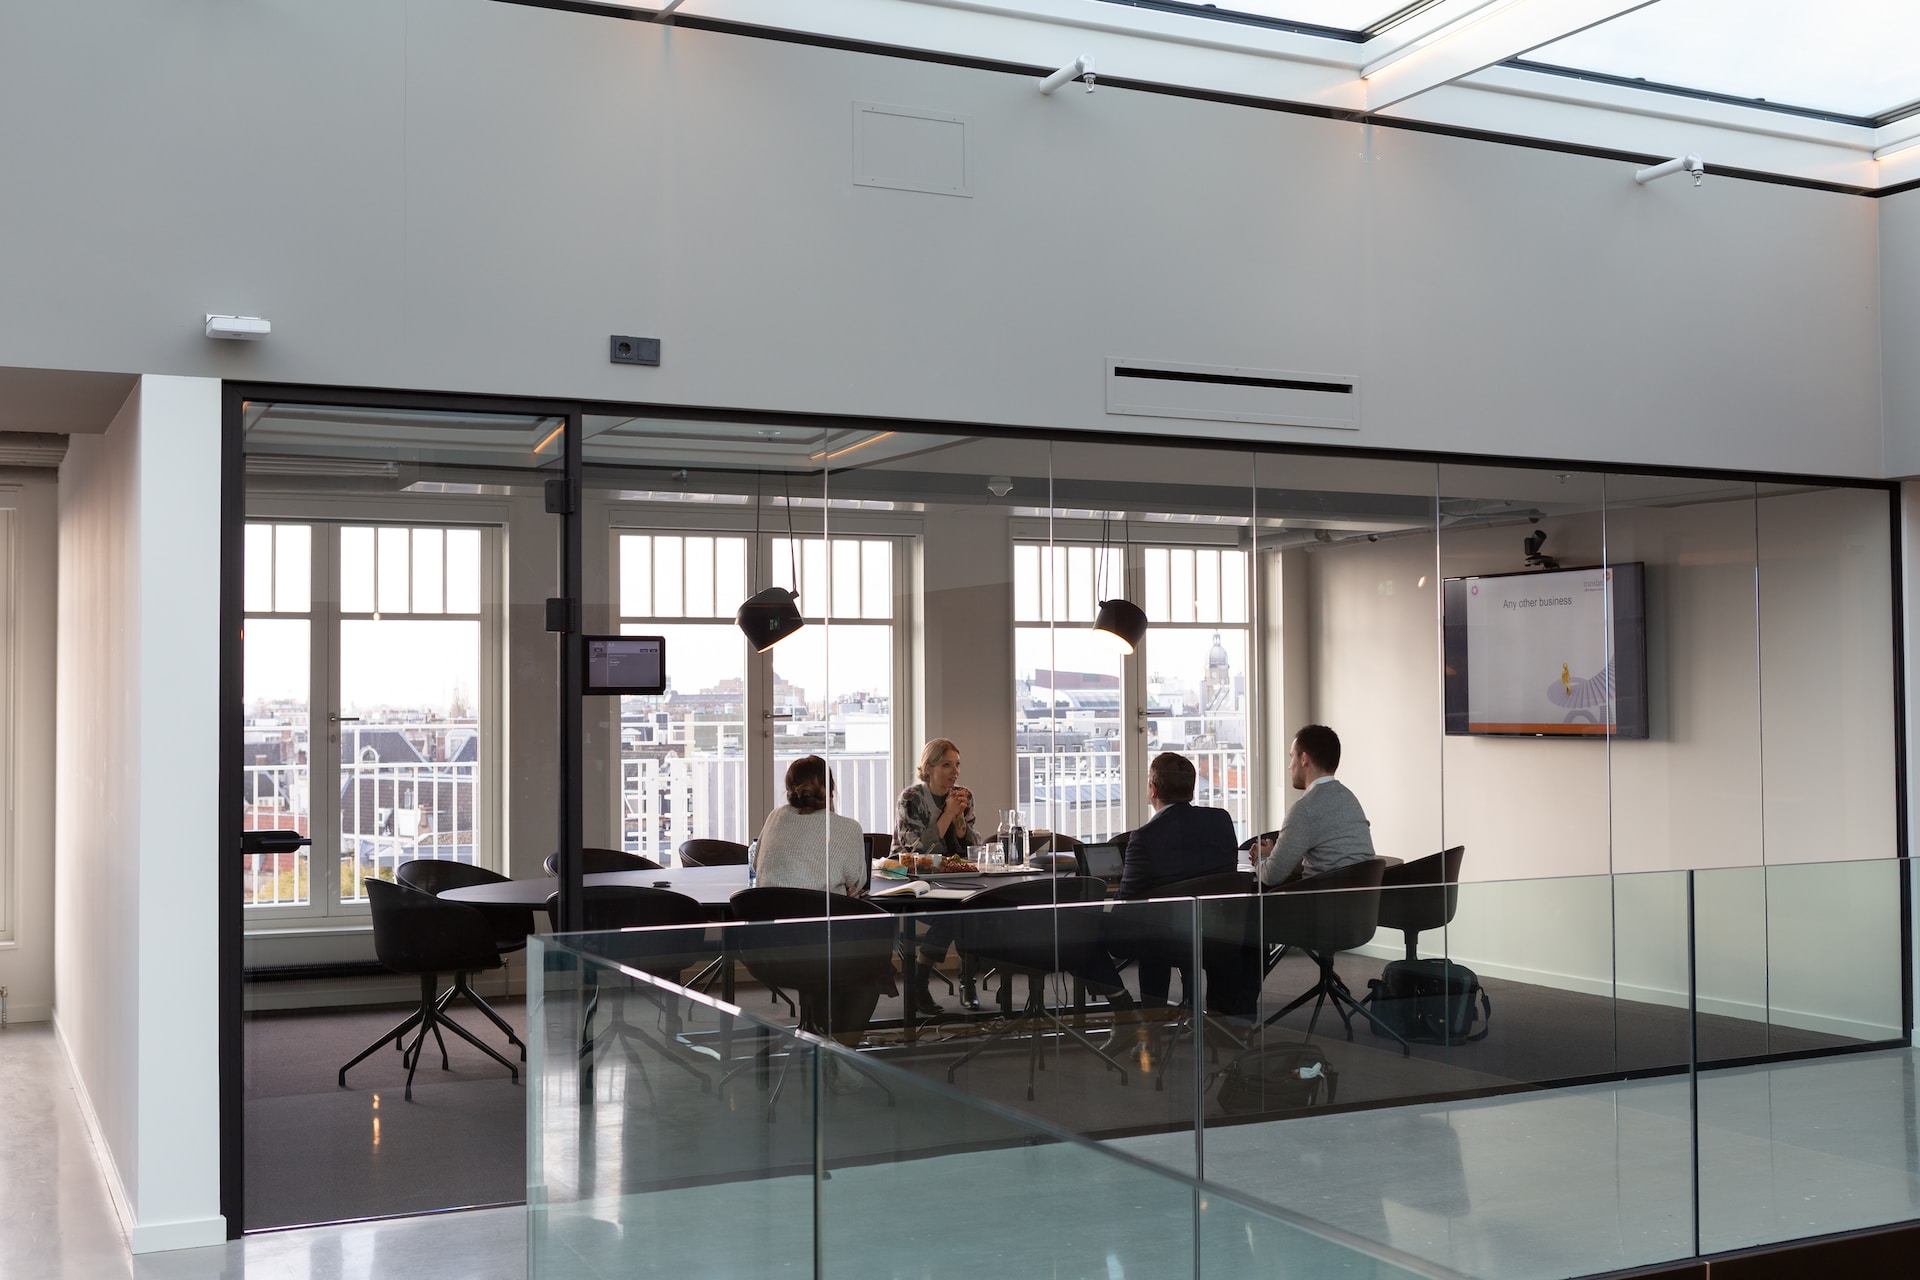 An executive team meets in an open-plan, glass-walled meeting room.